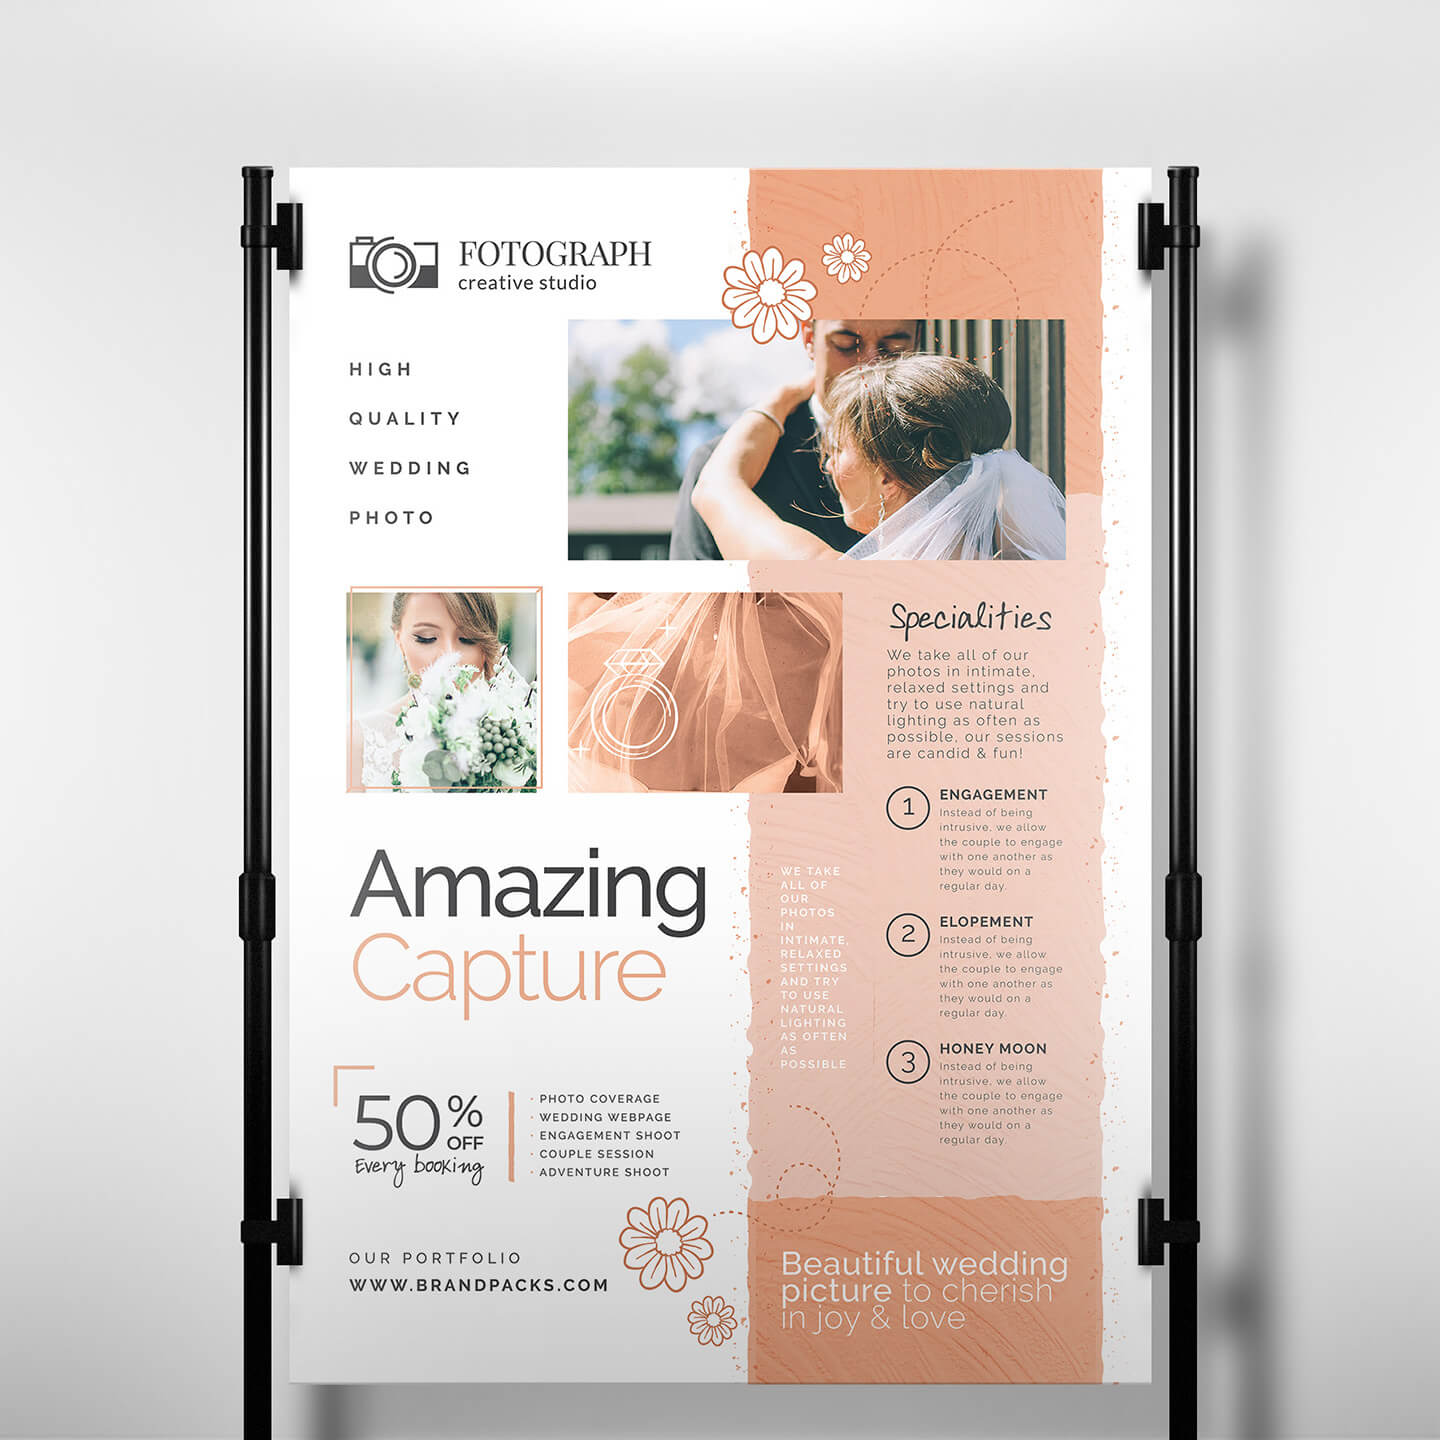 Photography Service Banner Template - Psd, Ai & Vector Intended For Photography Banner Template